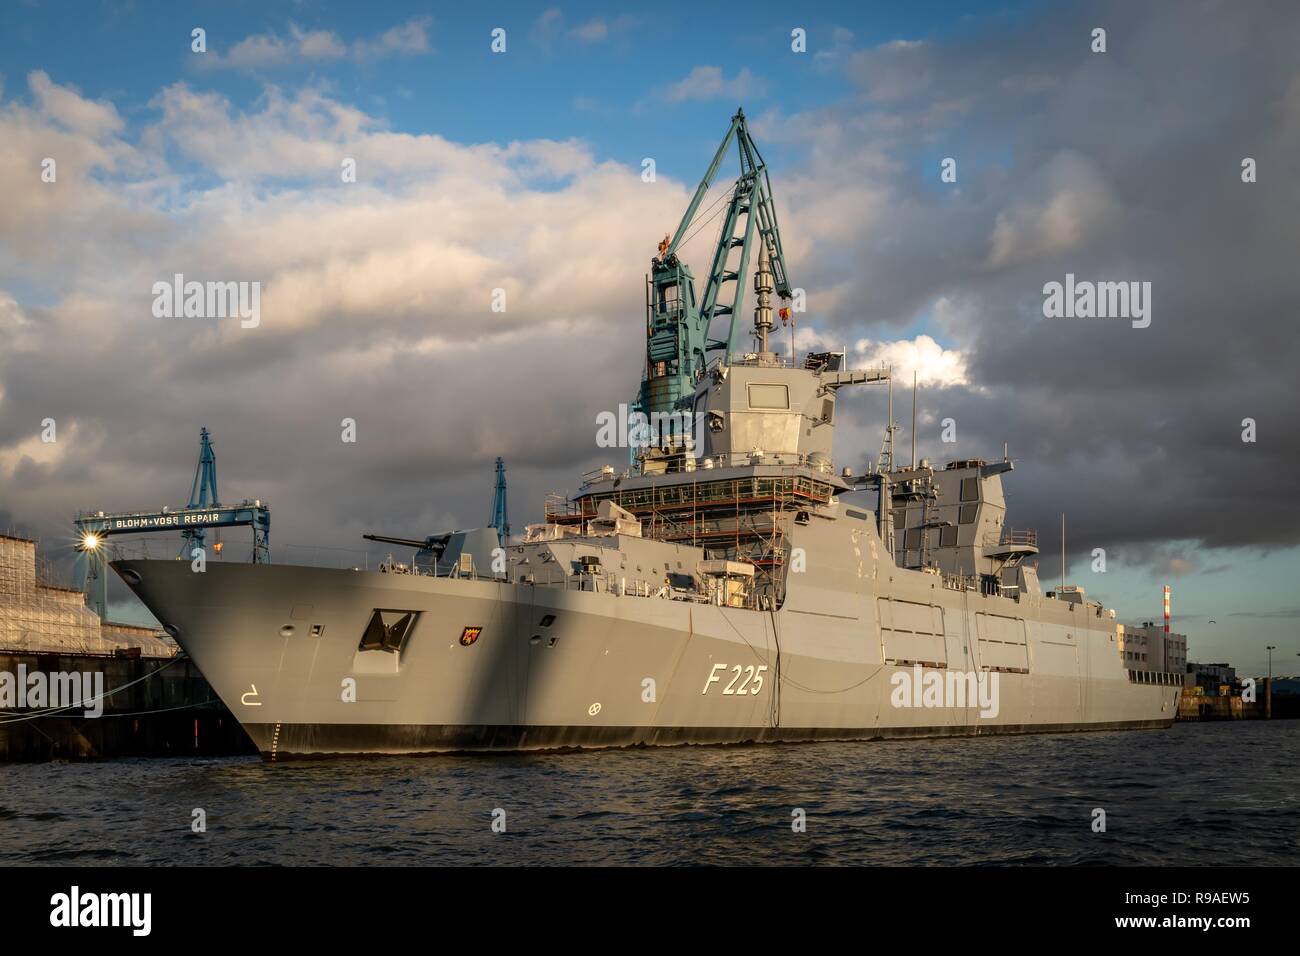 02.11.2018, The Frigate Rhineland-Palatinate/F 225 is under construction and is currently docked at the Blohm & Voss shipyard in Hamburg. The Rhineland-Palatinate is a frigate of the German Navy and the fourth unit of the Baden-Wurttemberg class, which is also called the F125 class. The named after the federal state of Rhineland-Palatinate warship is, after the decommissioned in 2013 frigate Rhineland-Palatinate (F 209) of the Bremen class, the second unit of this name in a German Navy. The commissioning and handover to the 4th Frigate Squadron is planned for 2020. | usage worldwide Stock Photo